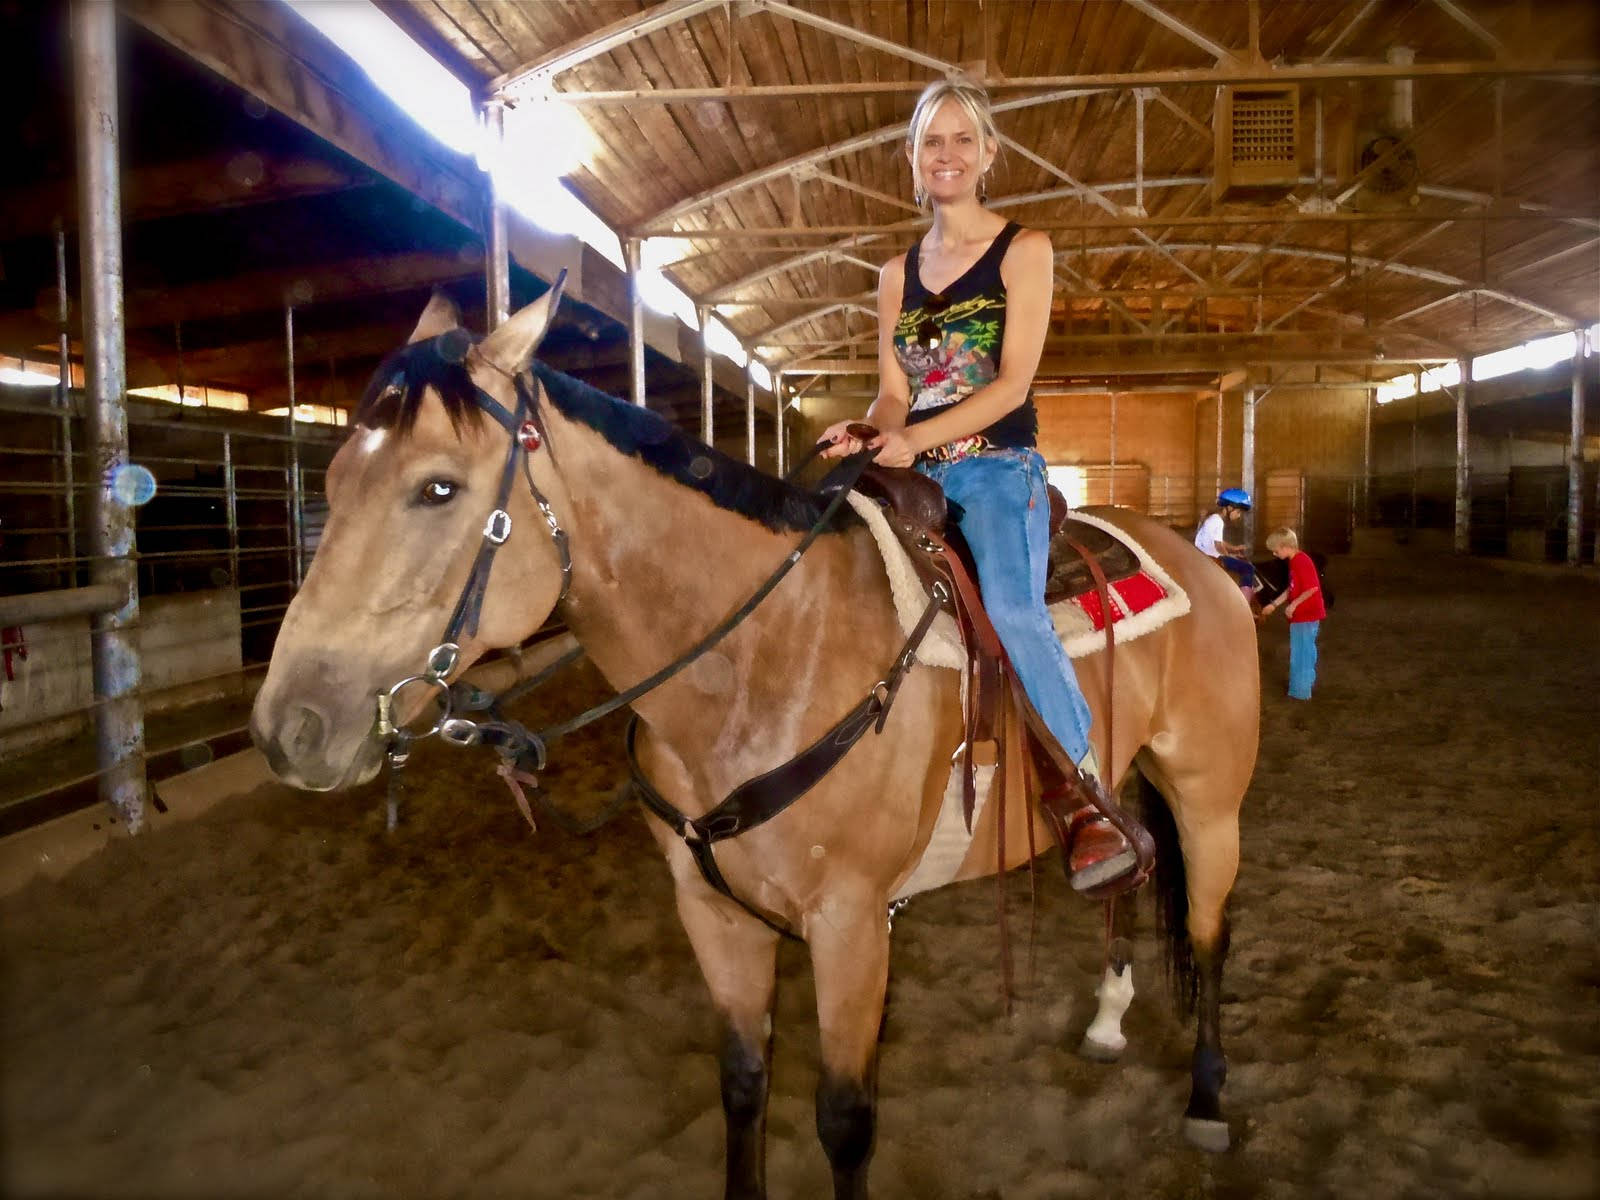 "Ready, Set, Go! Barrel Racing is a thrill ride they won't soon forget." Wallpaper